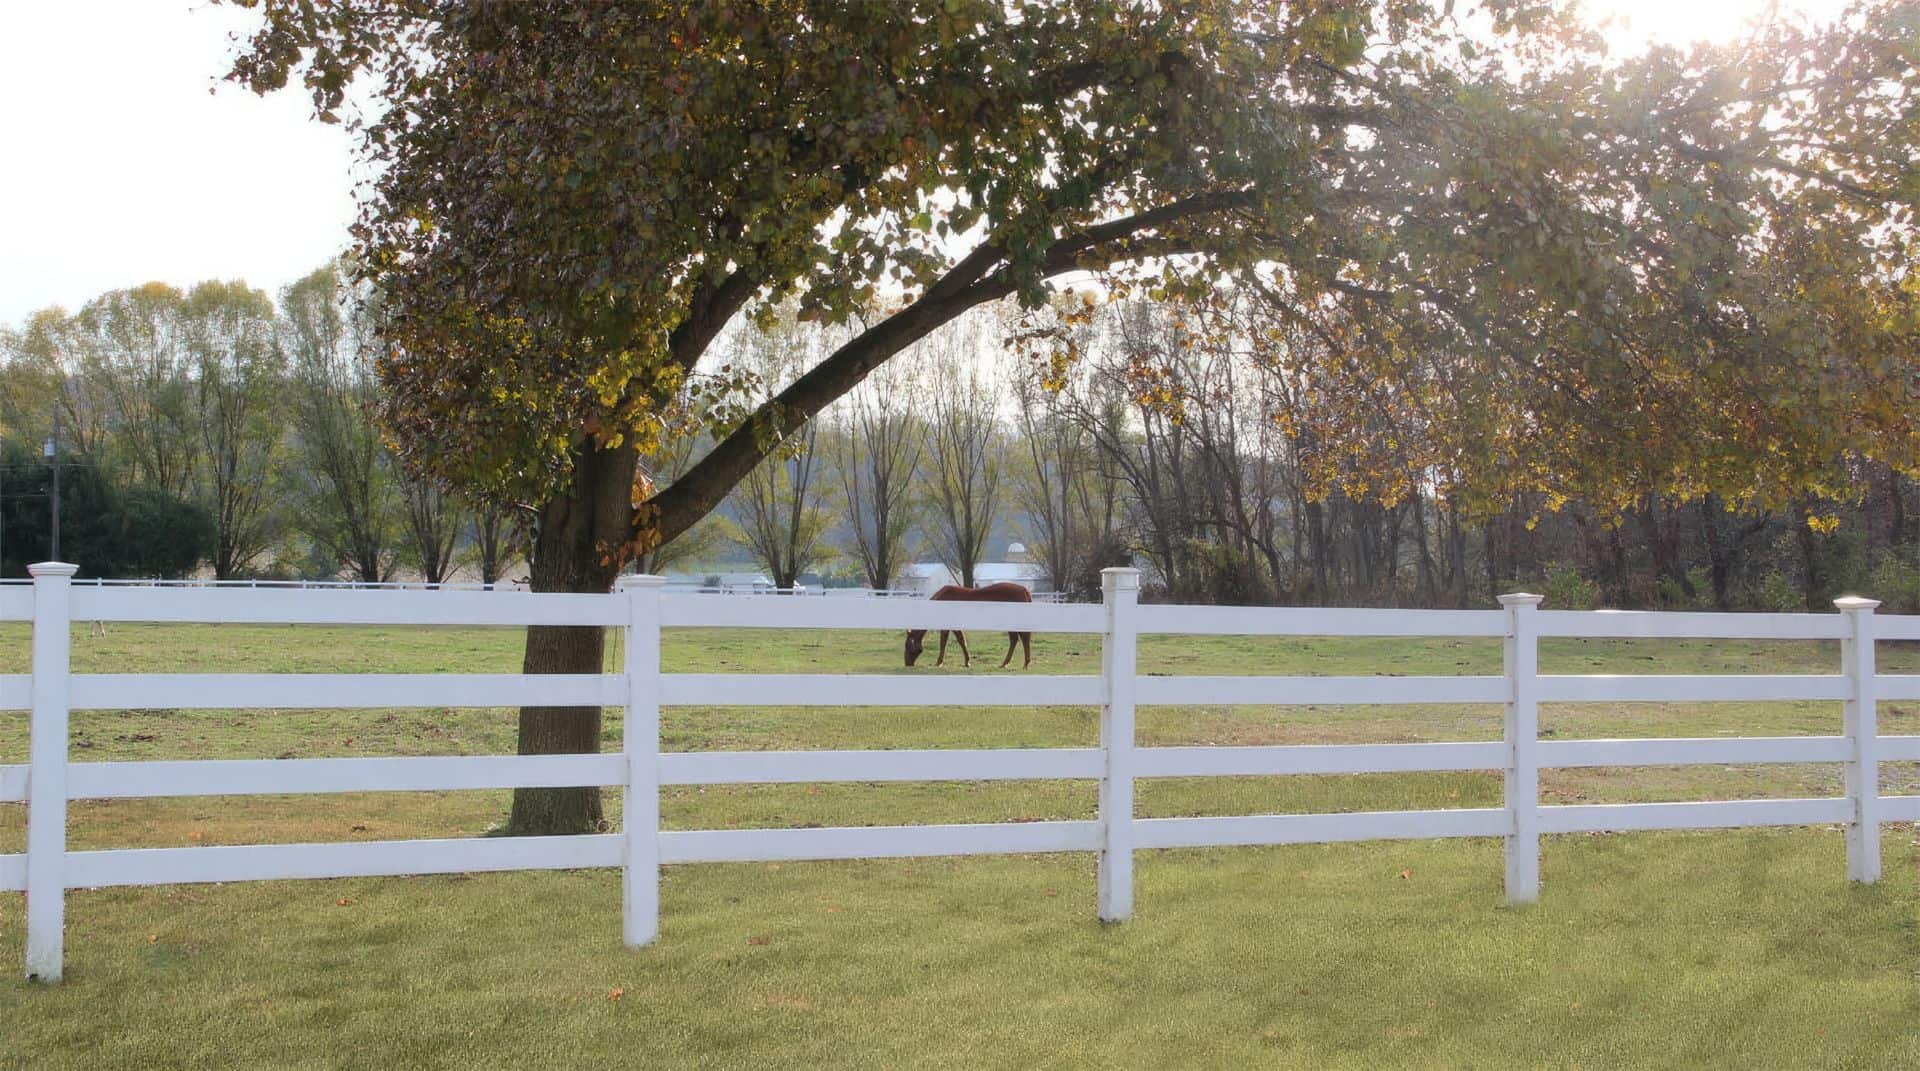 Country home with vinyl 4-rail ranch fence, front lawn, open field, trees, and farm animals in background of a serene setting